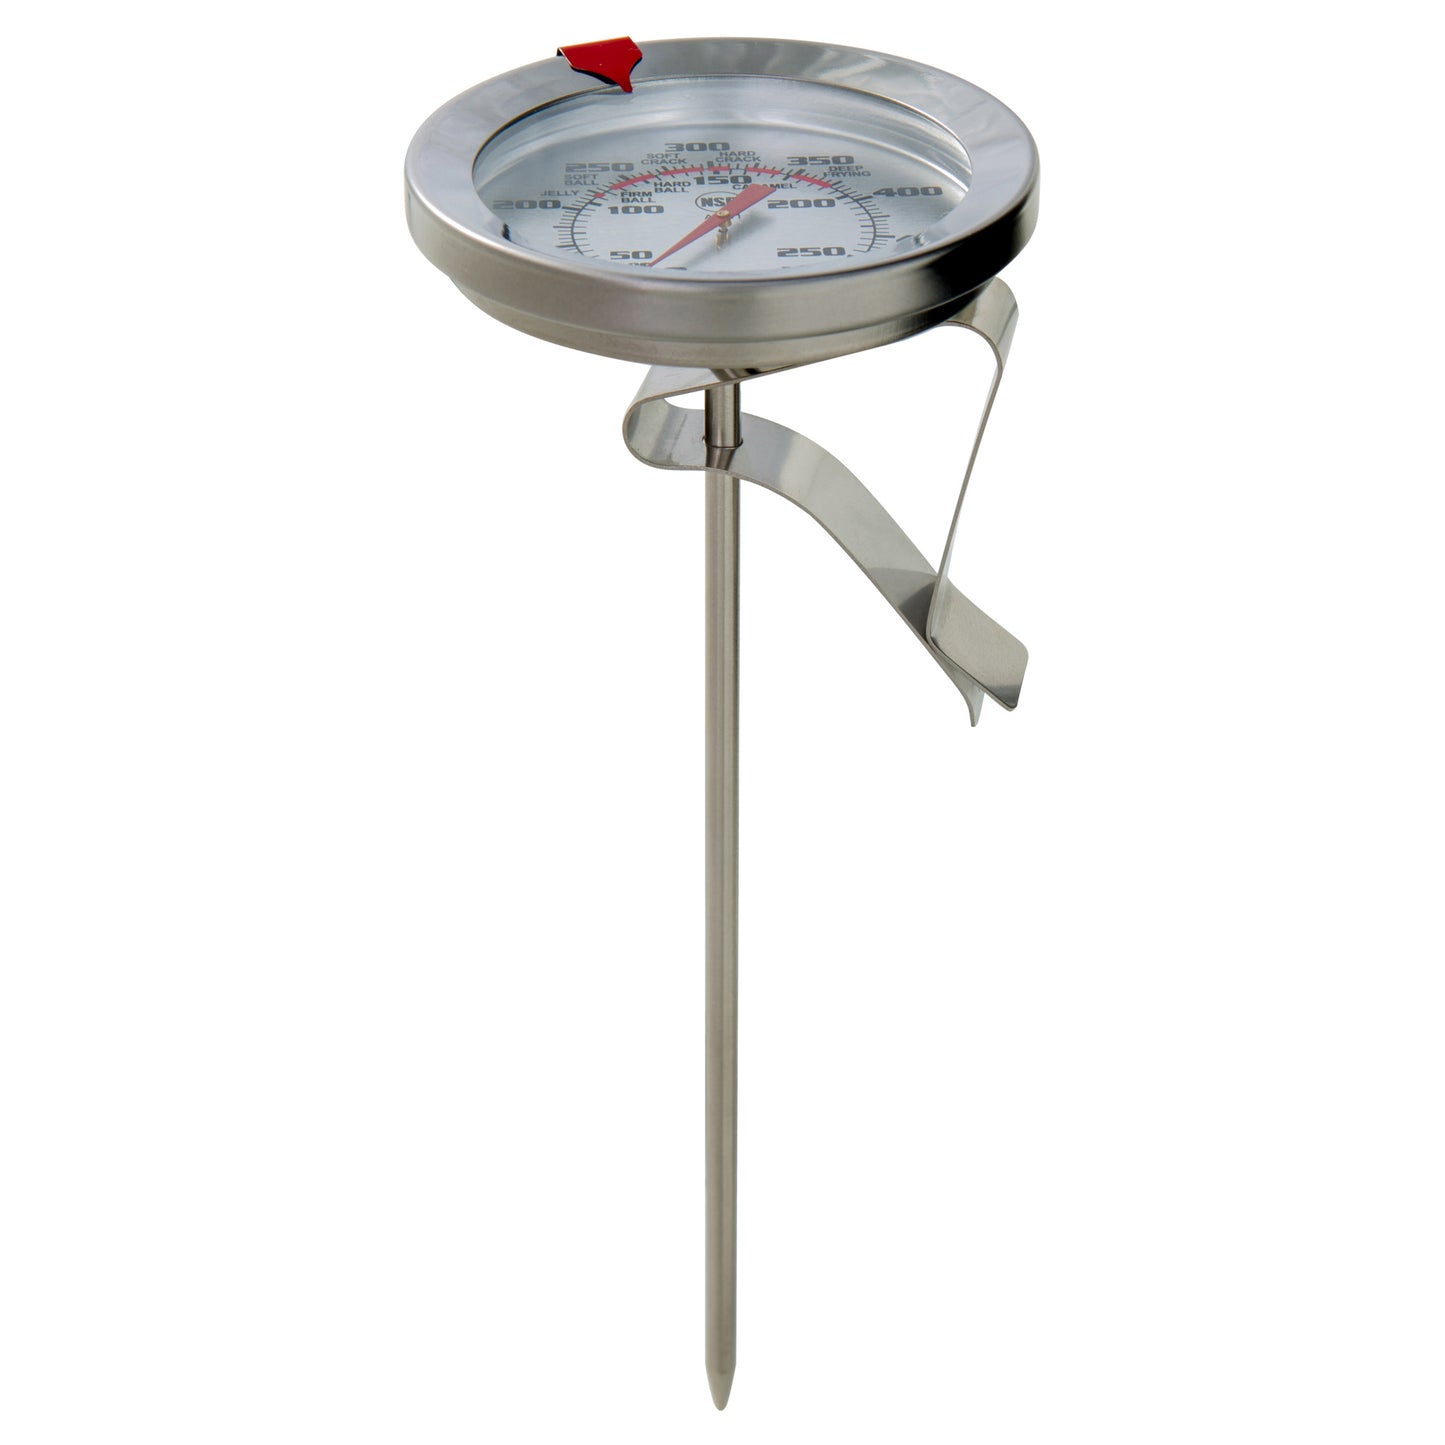 Candy / Deep Fry Dial Thermometer